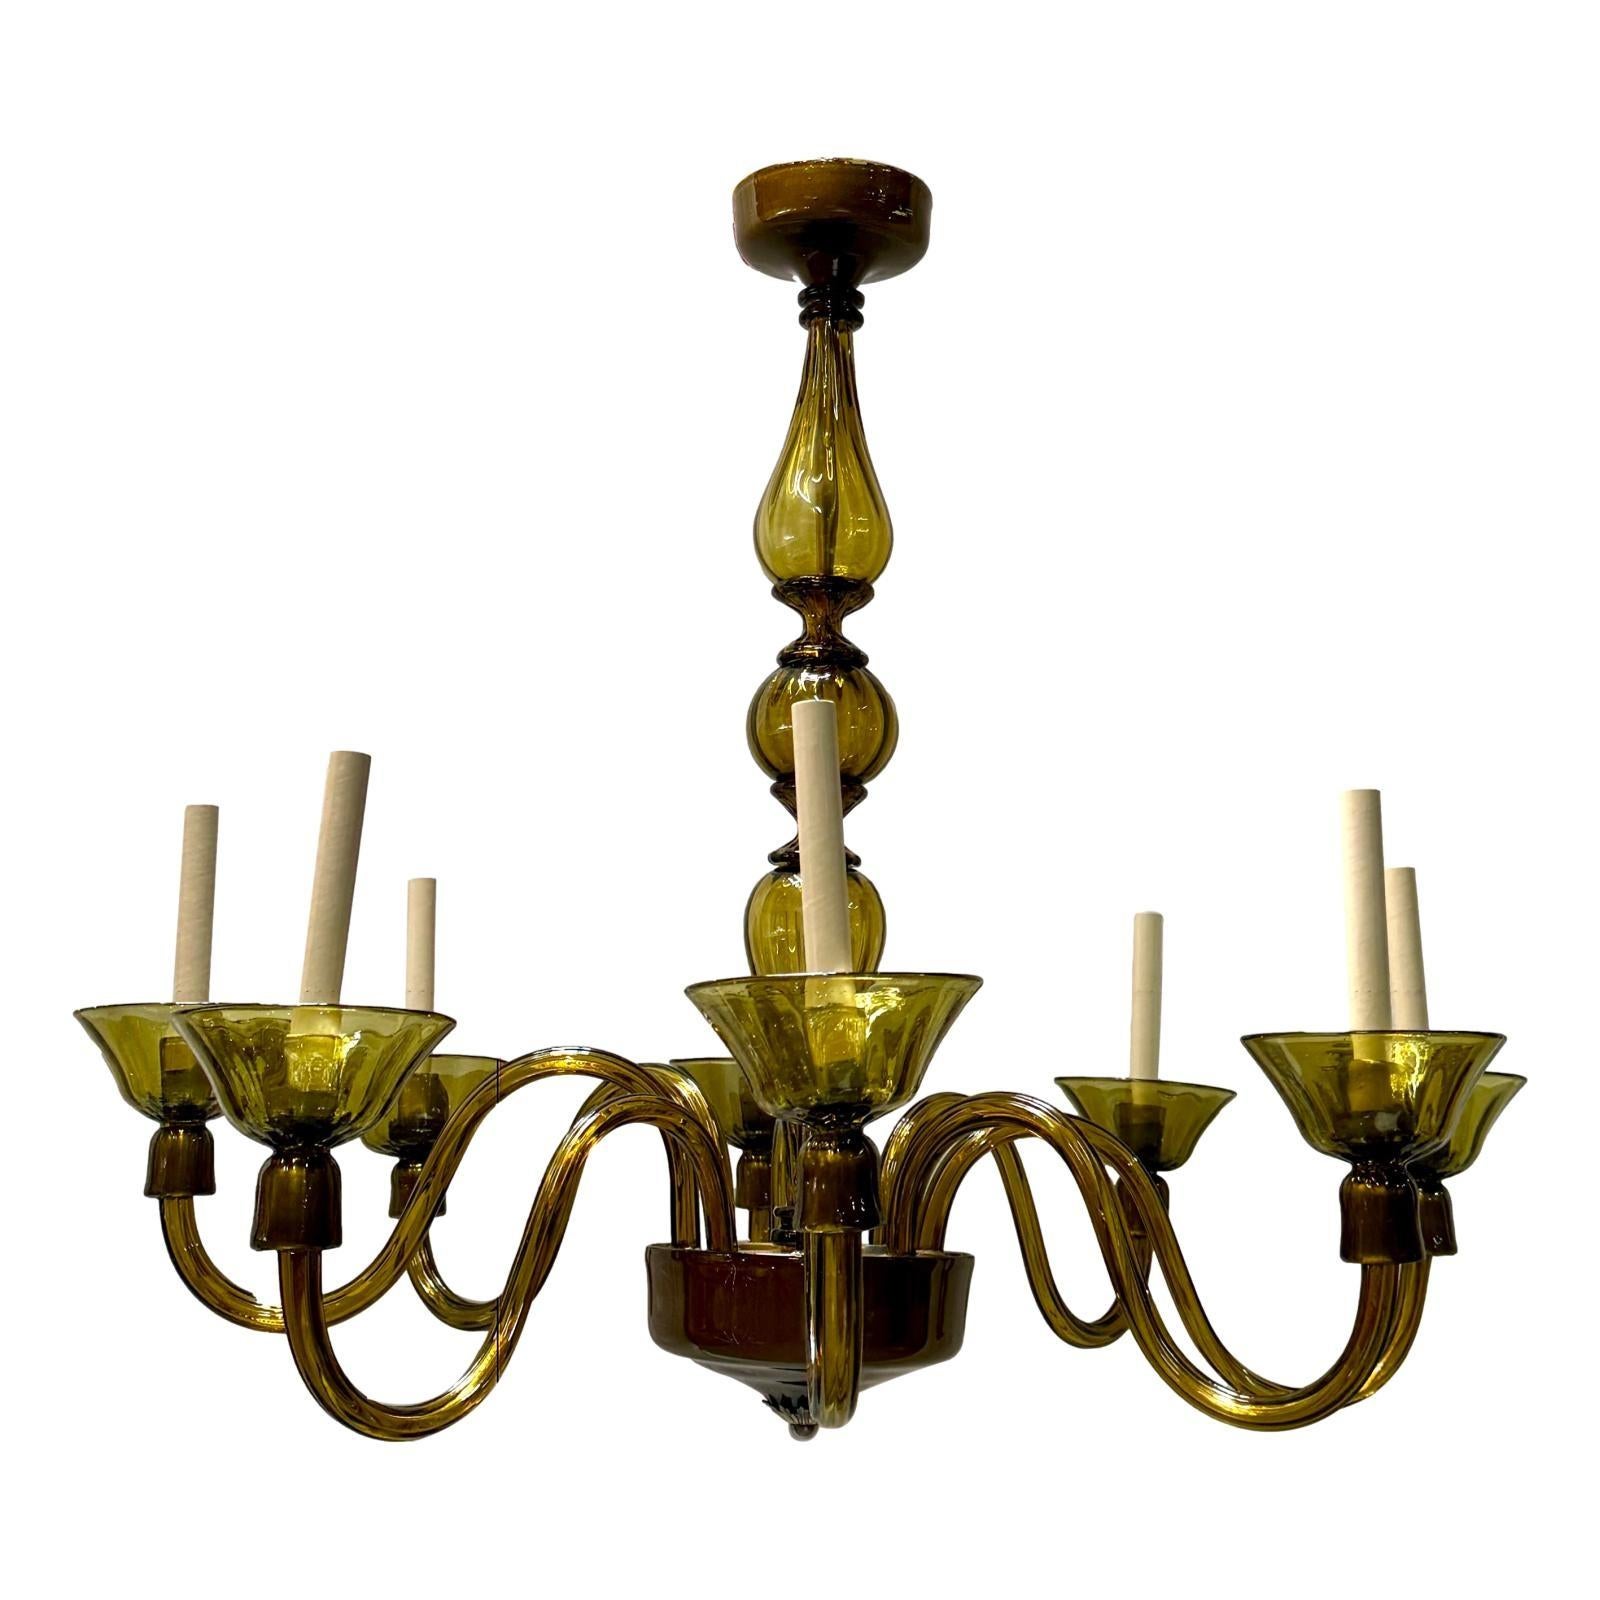 A pair of circa 1930's Italian Murano chandeliers with 8 arms. Sold individually.

Measurements:
Height of body: 35